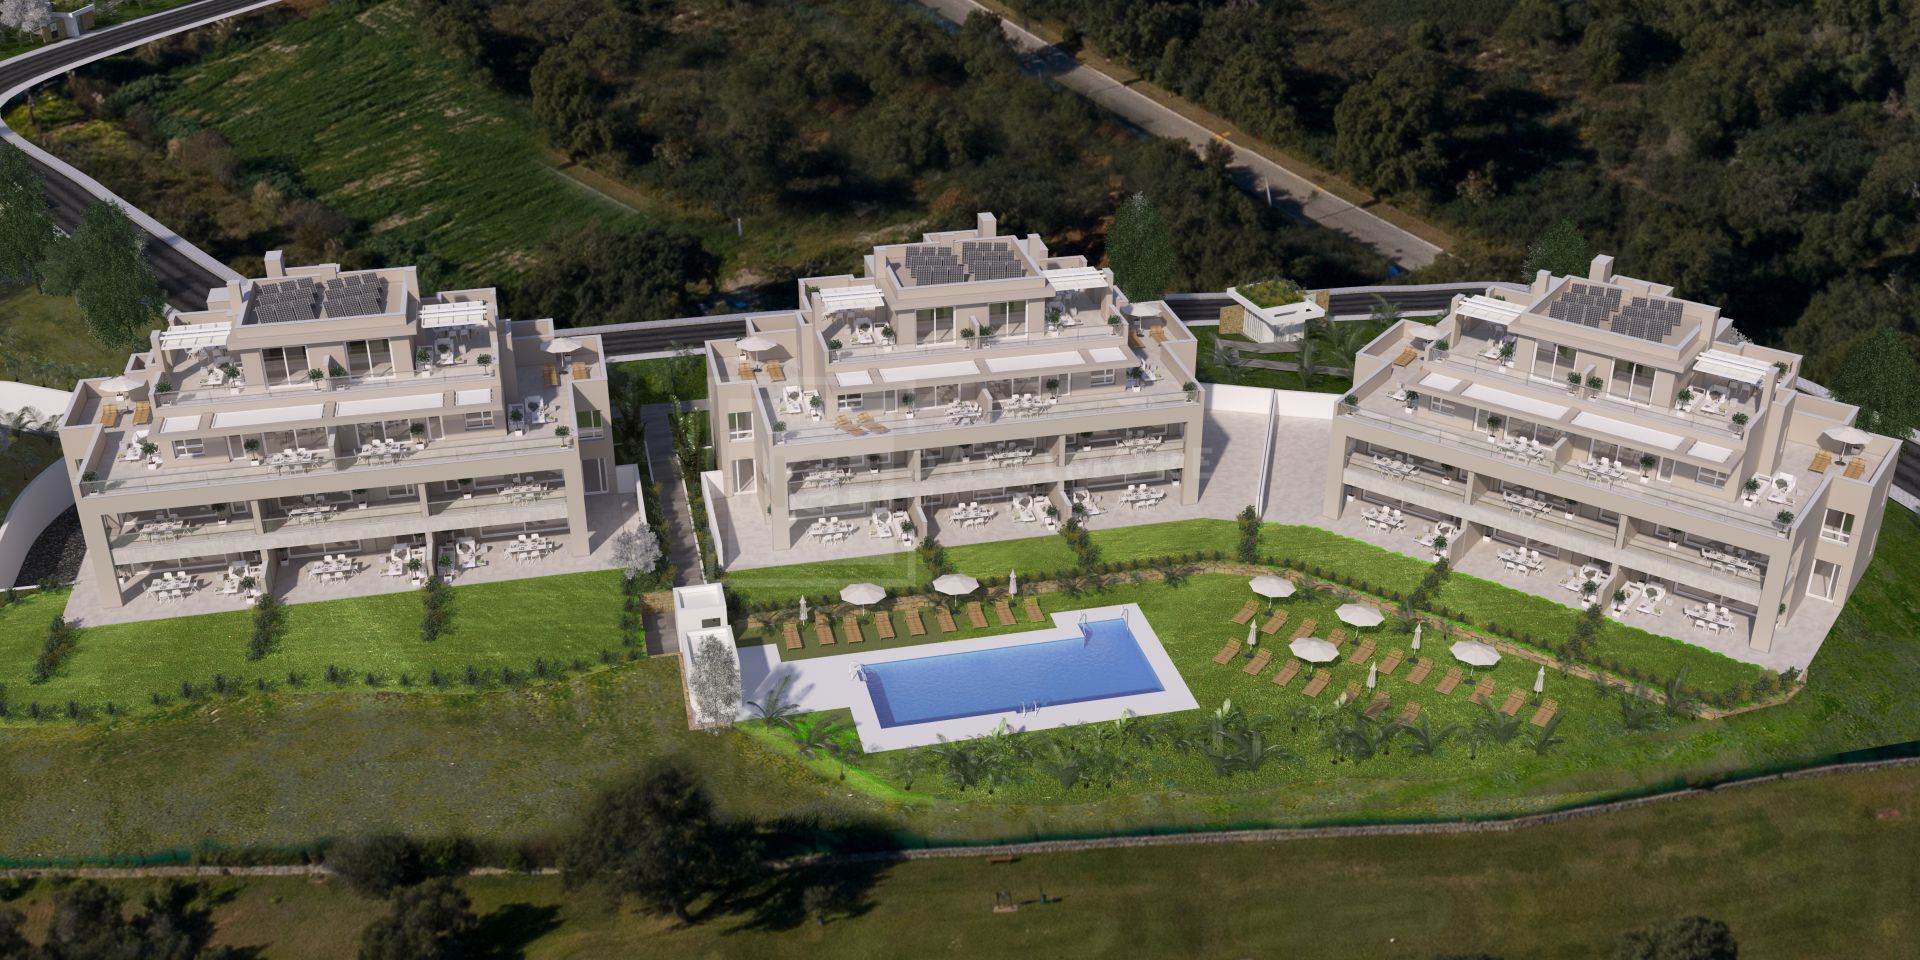 EMERALD GREENS - LUXURY HOUSES FOR SALE IN SOTOGRANDE